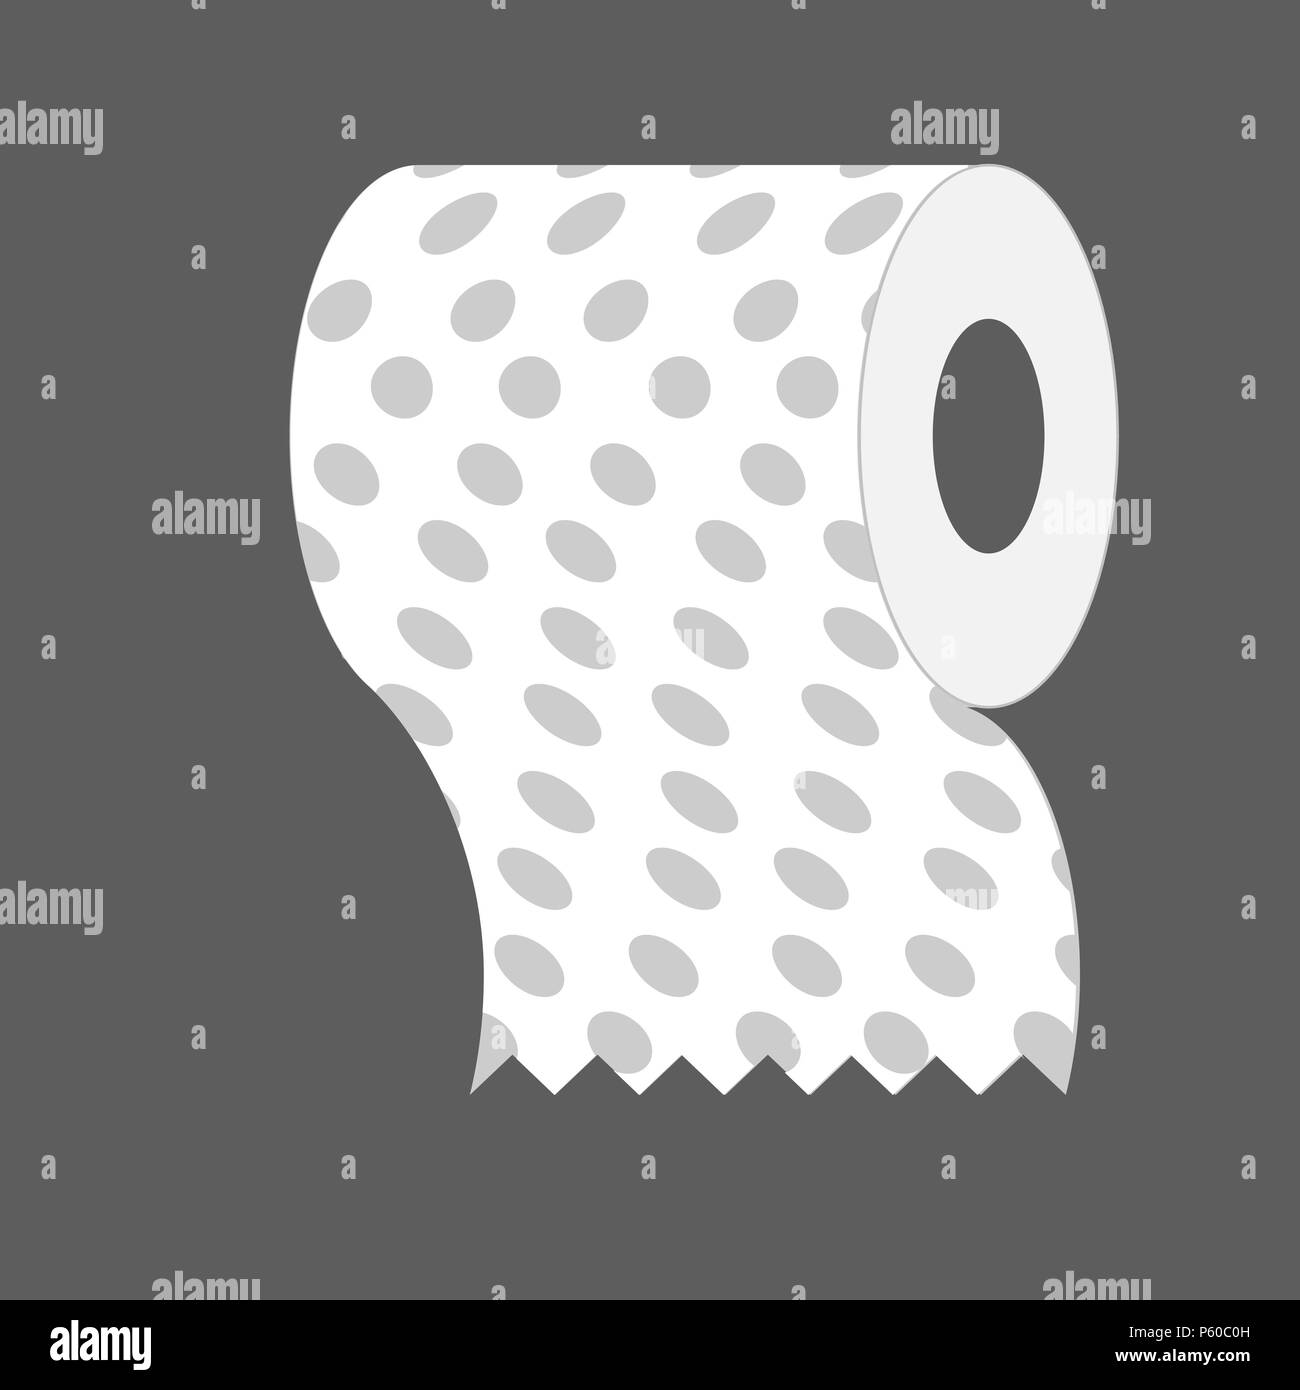 Roll of toilet paper isometrics. Special paper for wiping. paper product used in sanitary and hygienic purposes. eps10 Stock Vector